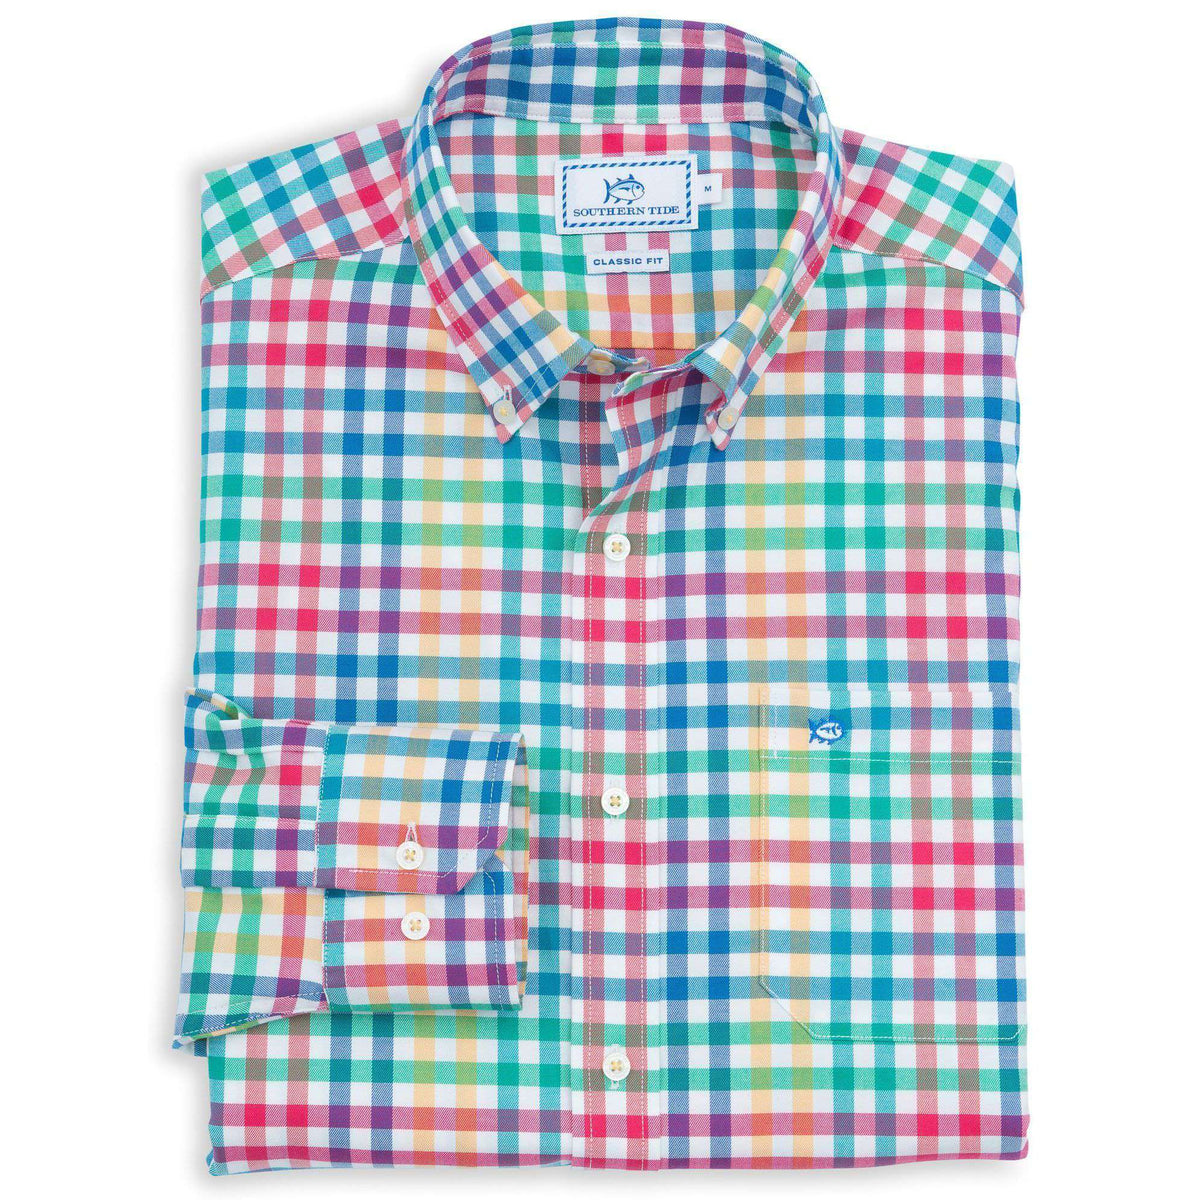 A-List Check Sport Shirt in Fire by Southern Tide - Country Club Prep